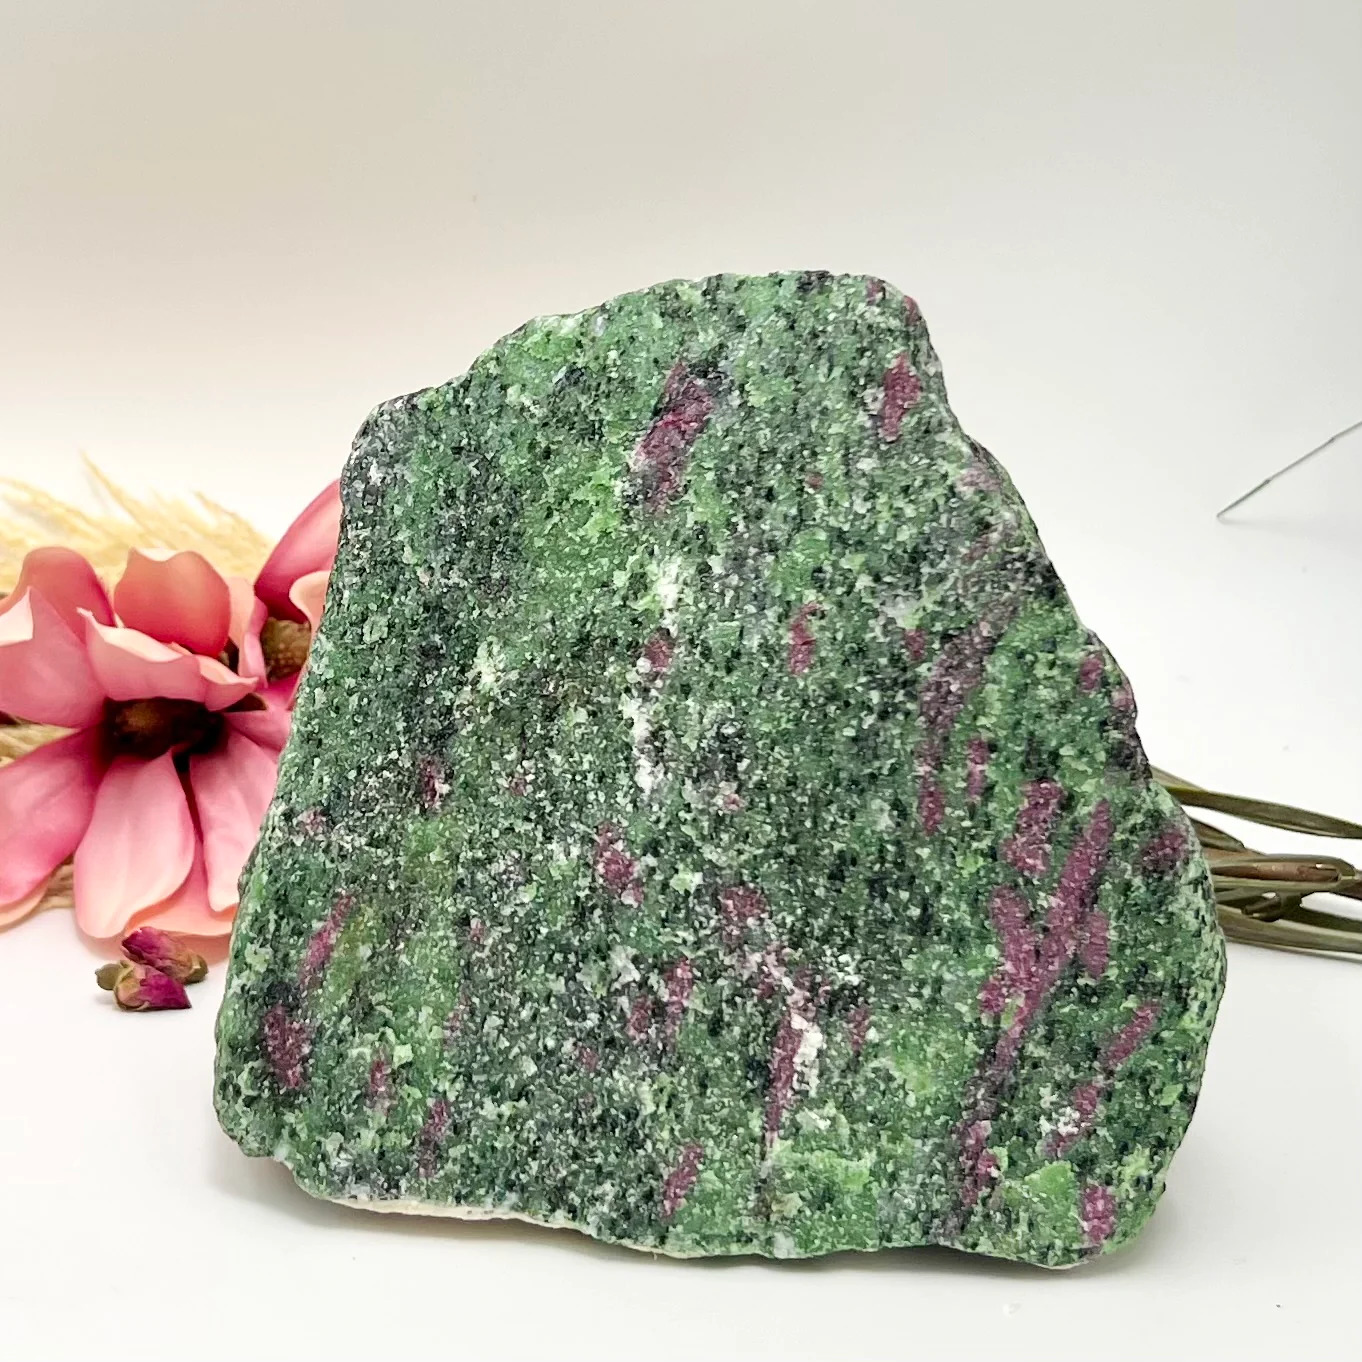 Large Ruby in Zoisite Anyolite Raw Natural Specimen UV Reactive Crystal 4427g